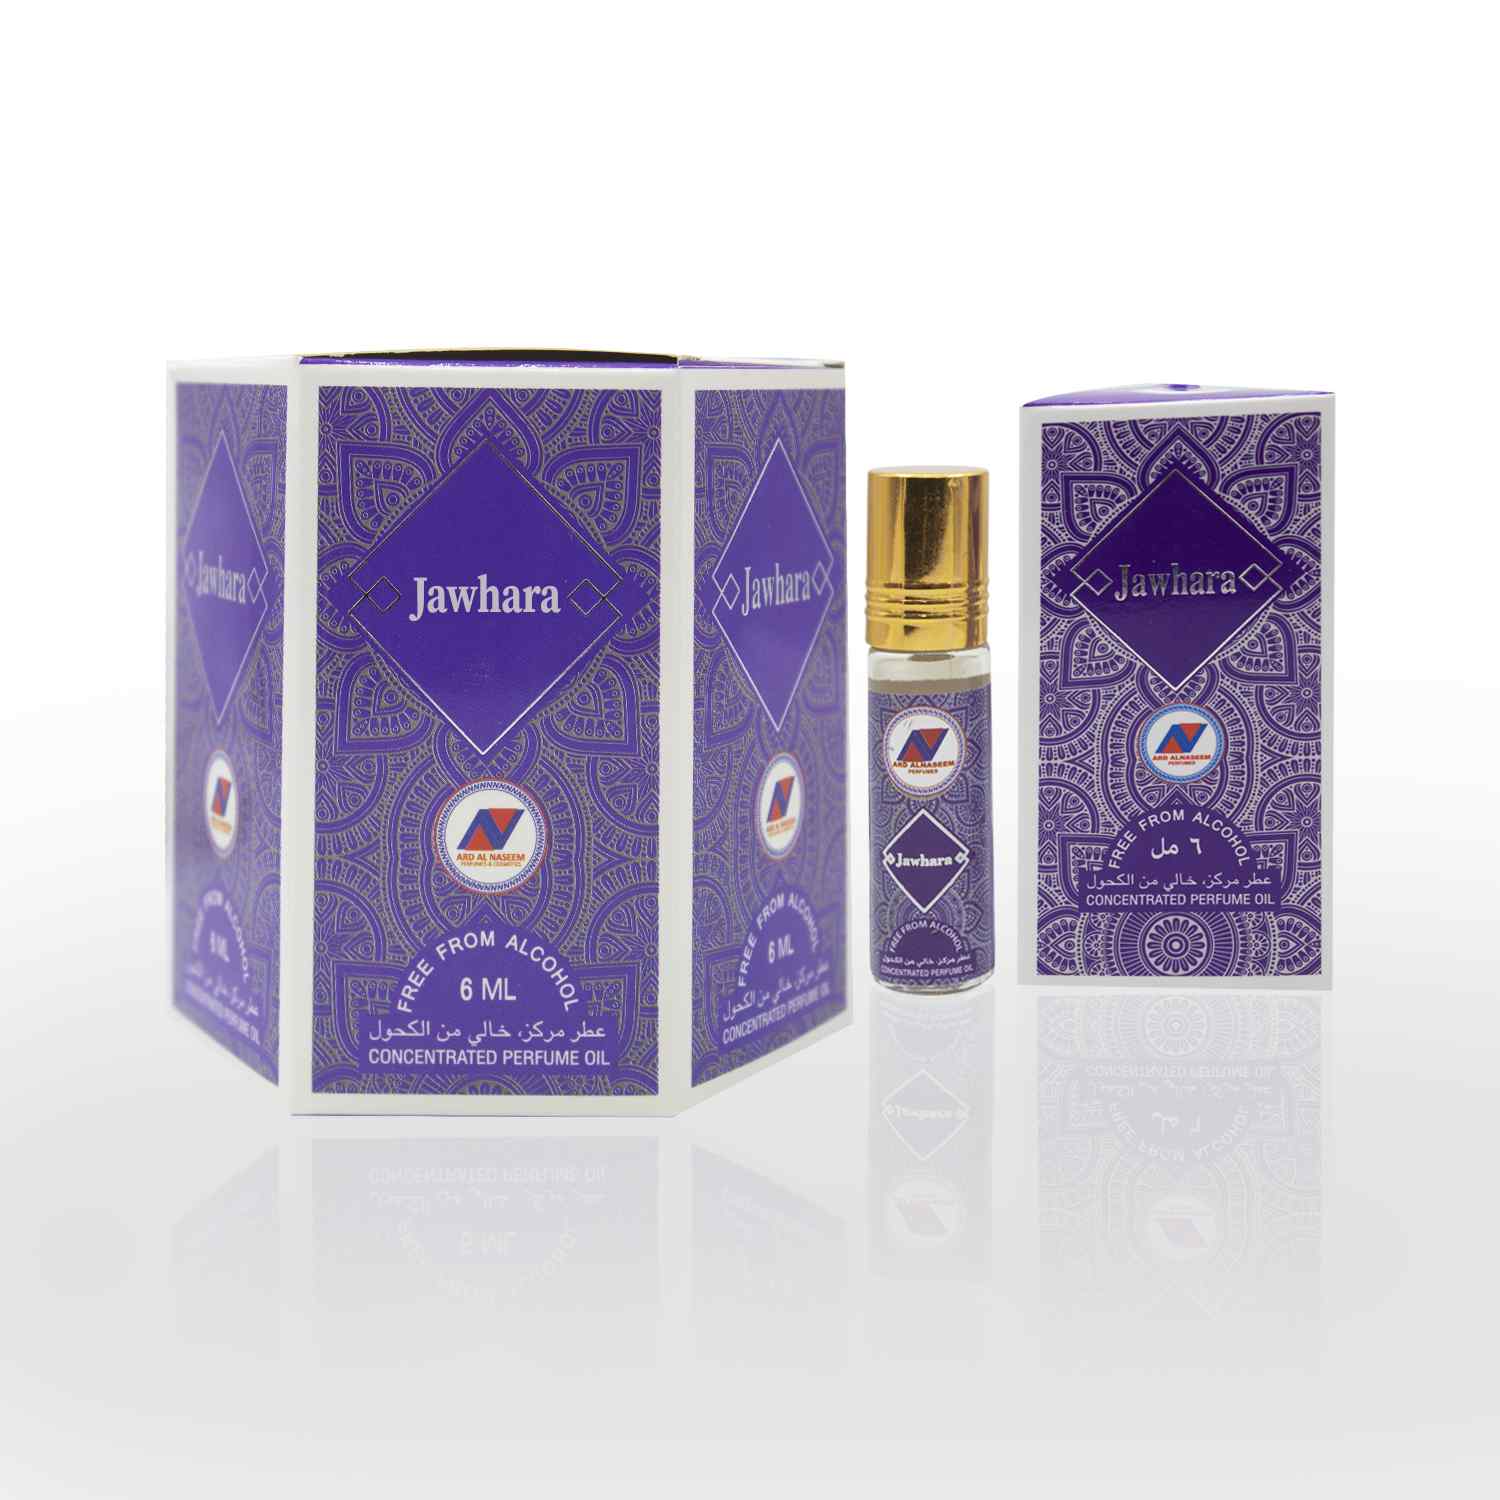 Jawhara 6ml Attar is a concentered perfume oil, free from Alcohol. It is a product of ARD perfumes. Made in UAE